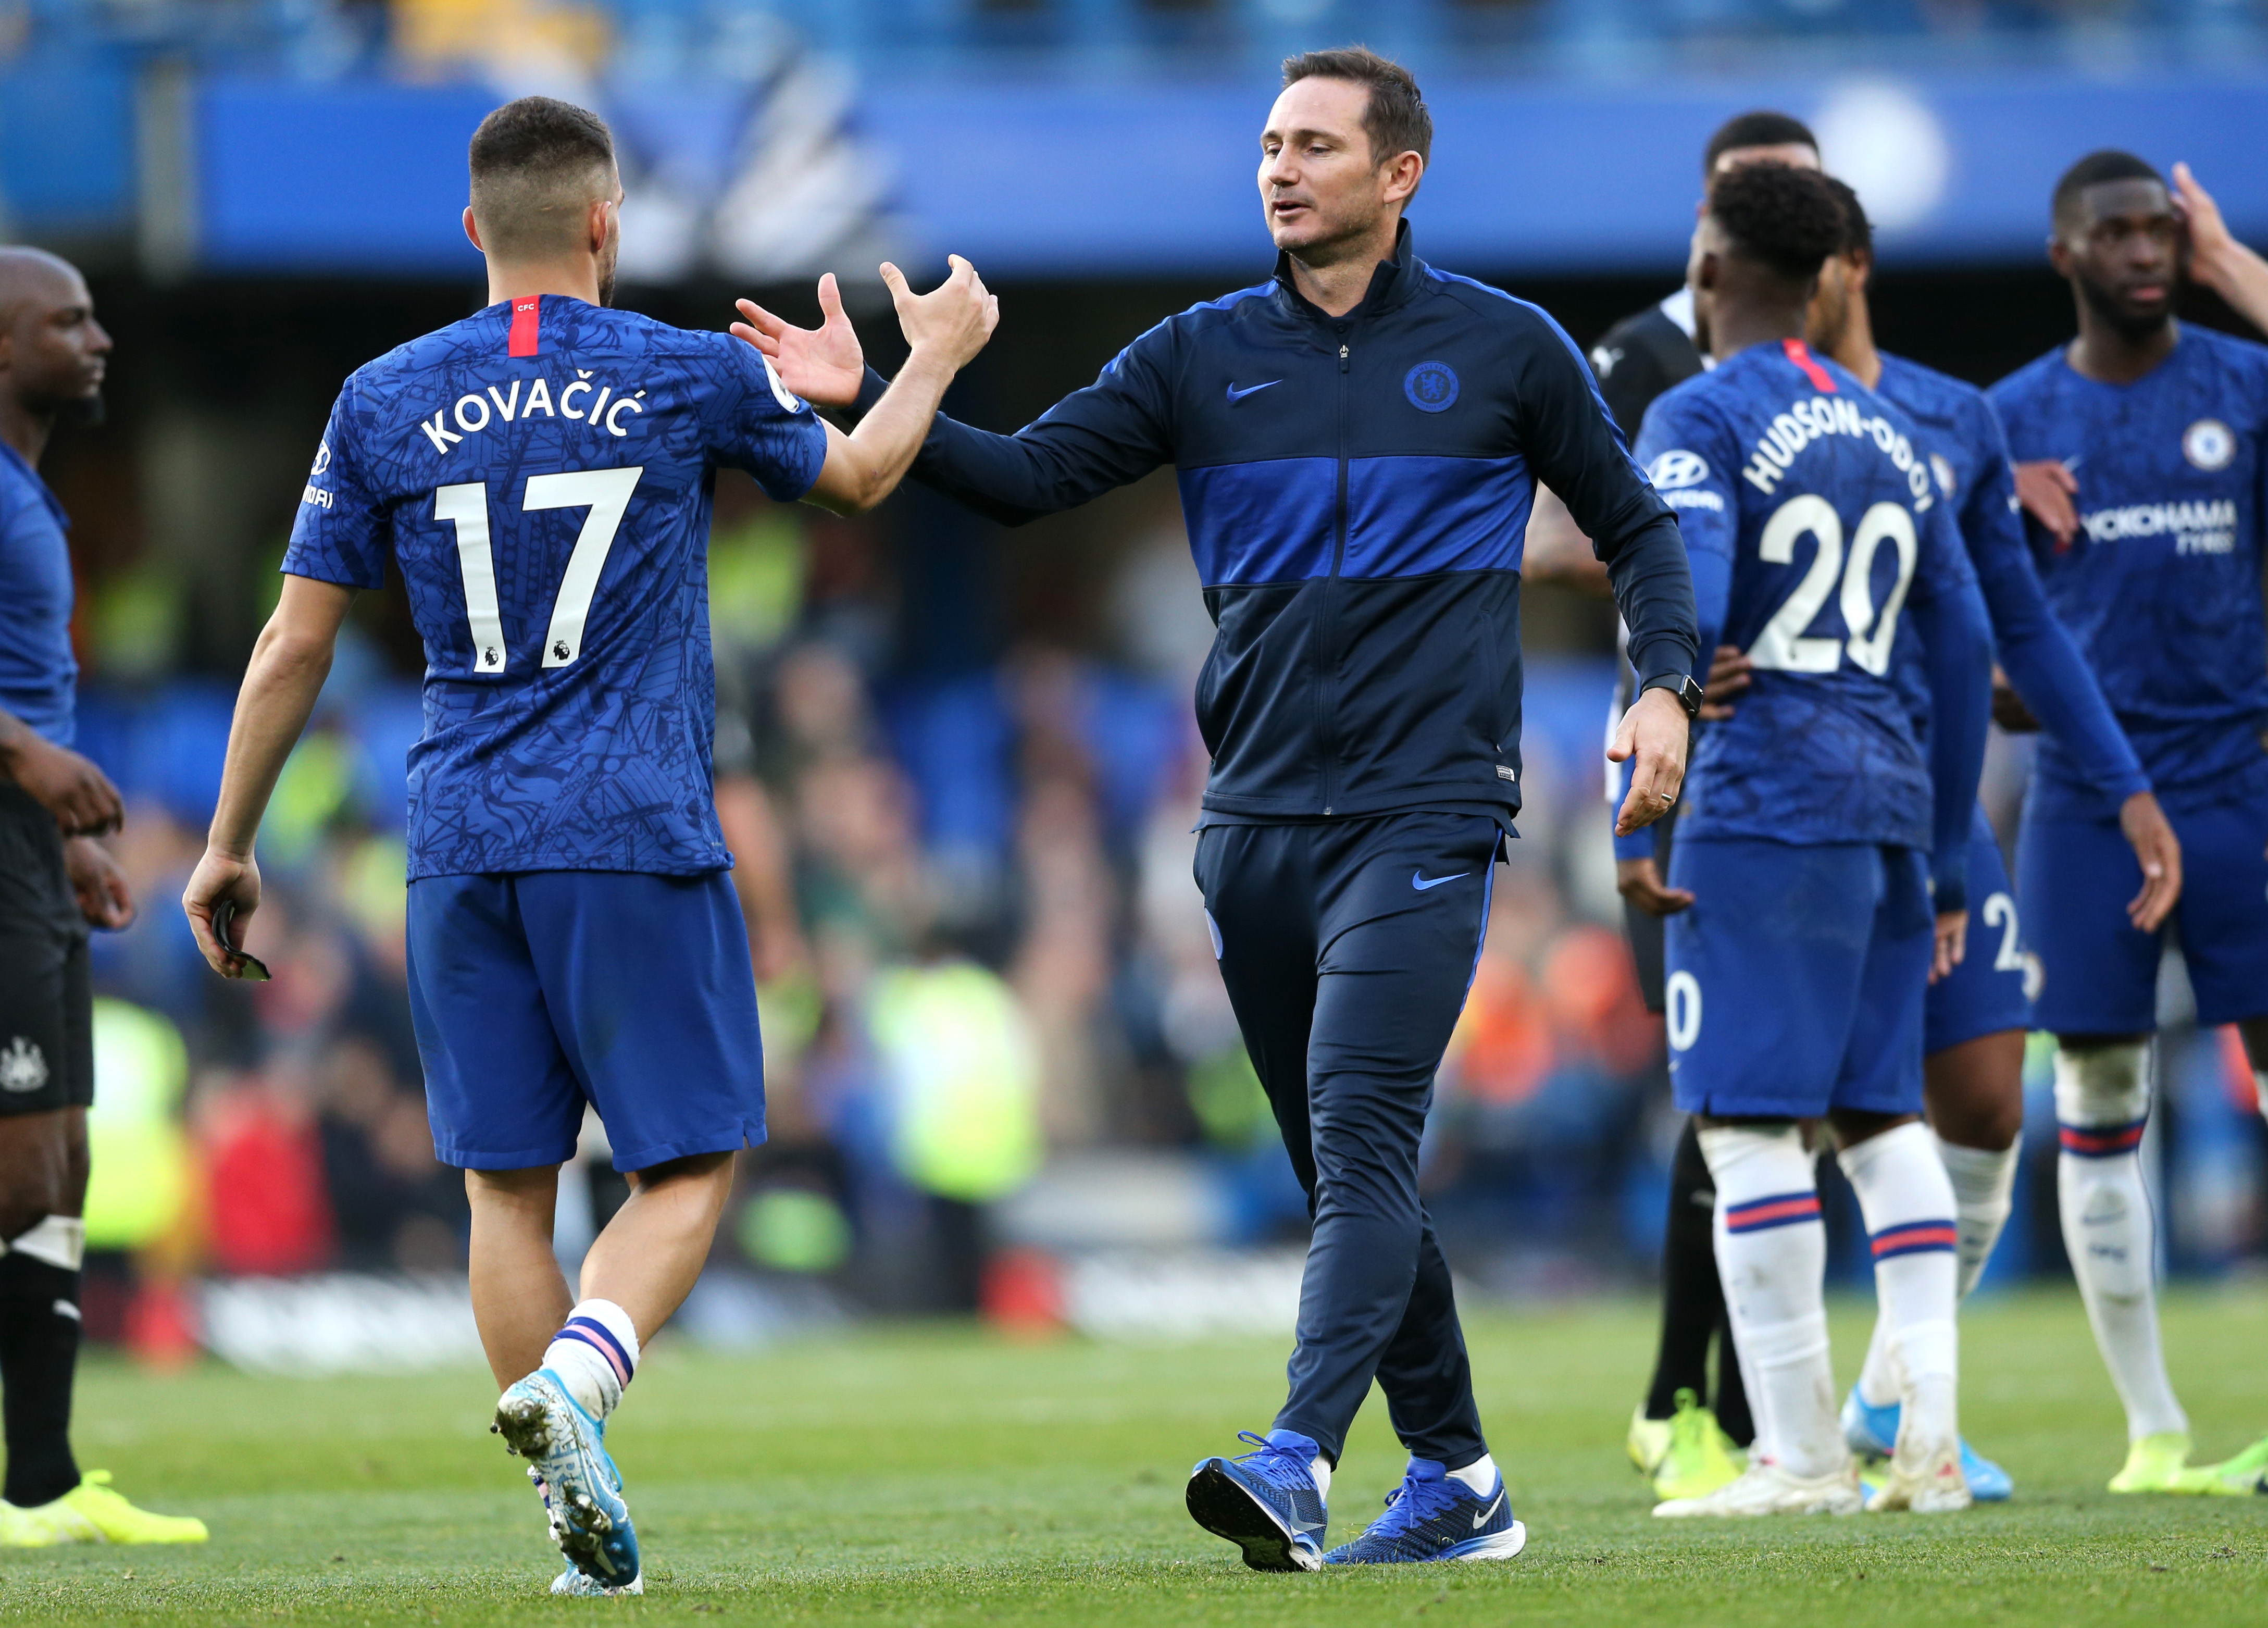 LONDON, ENGLAND - OCTOBER 19: Frank Lampard, Manager of Chelsea celebrates victory with Mateo Kovacic of Chelsea following the Premier League match between Chelsea FC and Newcastle United at Stamford Bridge on October 19, 2019 in London, United Kingdom. (Photo by Paul Harding/Getty Images)